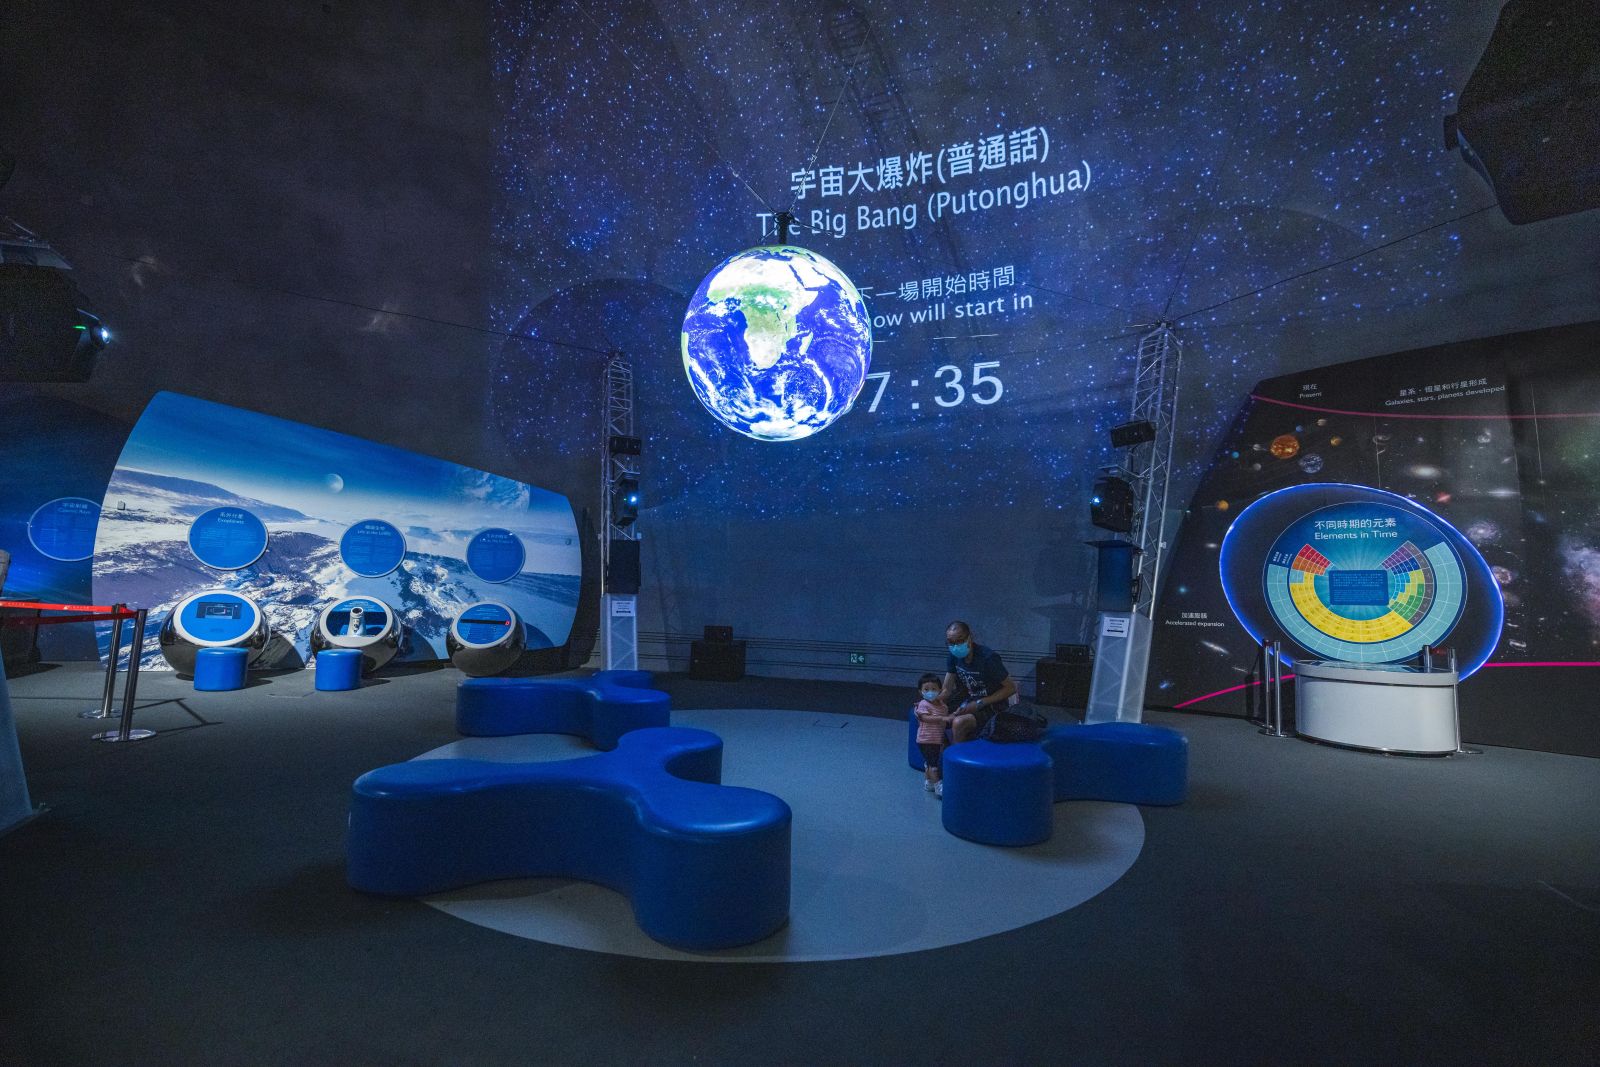 The universe is waiting, so why not start exploring at the Hong Kong Space Museum?